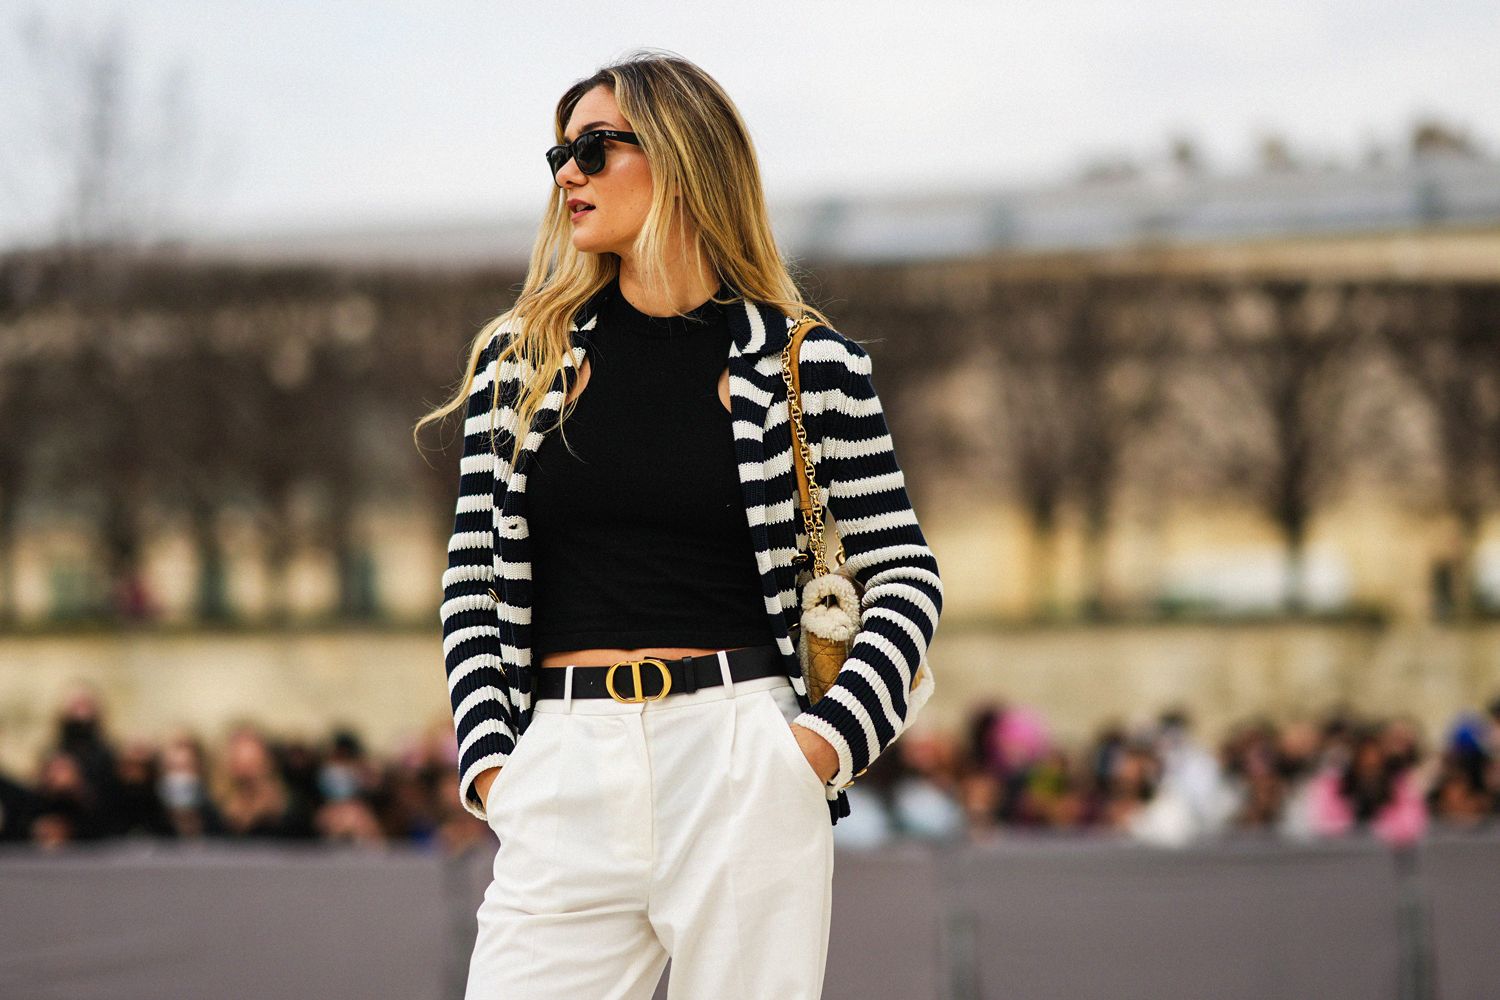 Classic Stripes  Stripe pants outfit, Black striped pants outfit